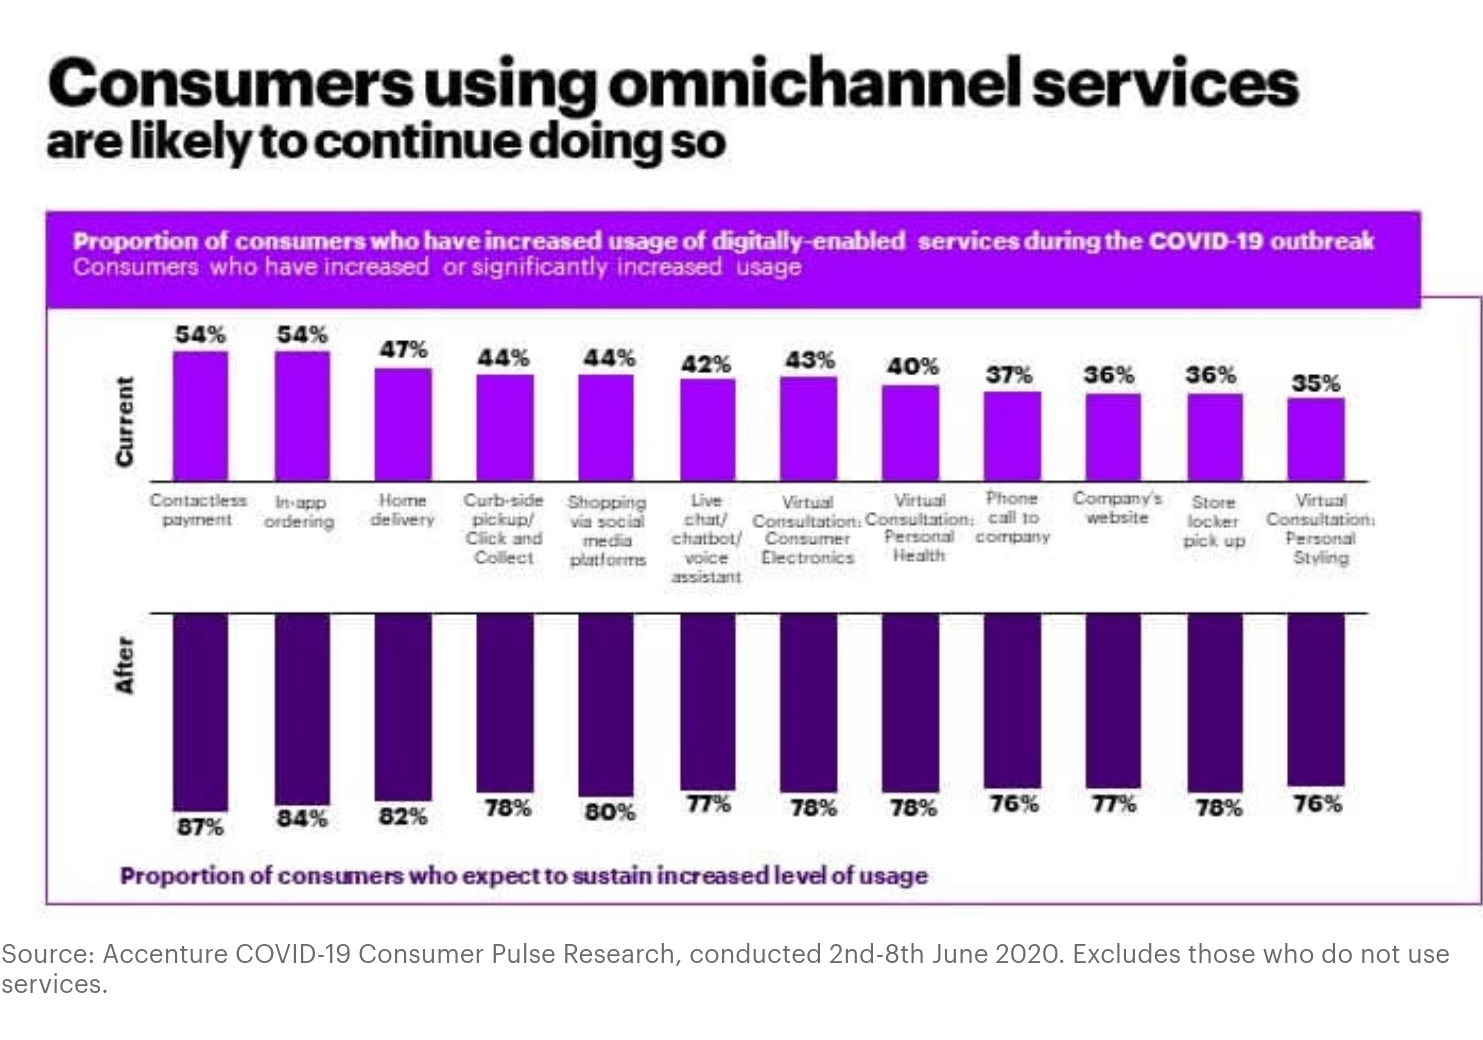 Chart showing consumer usage of omnichannel services